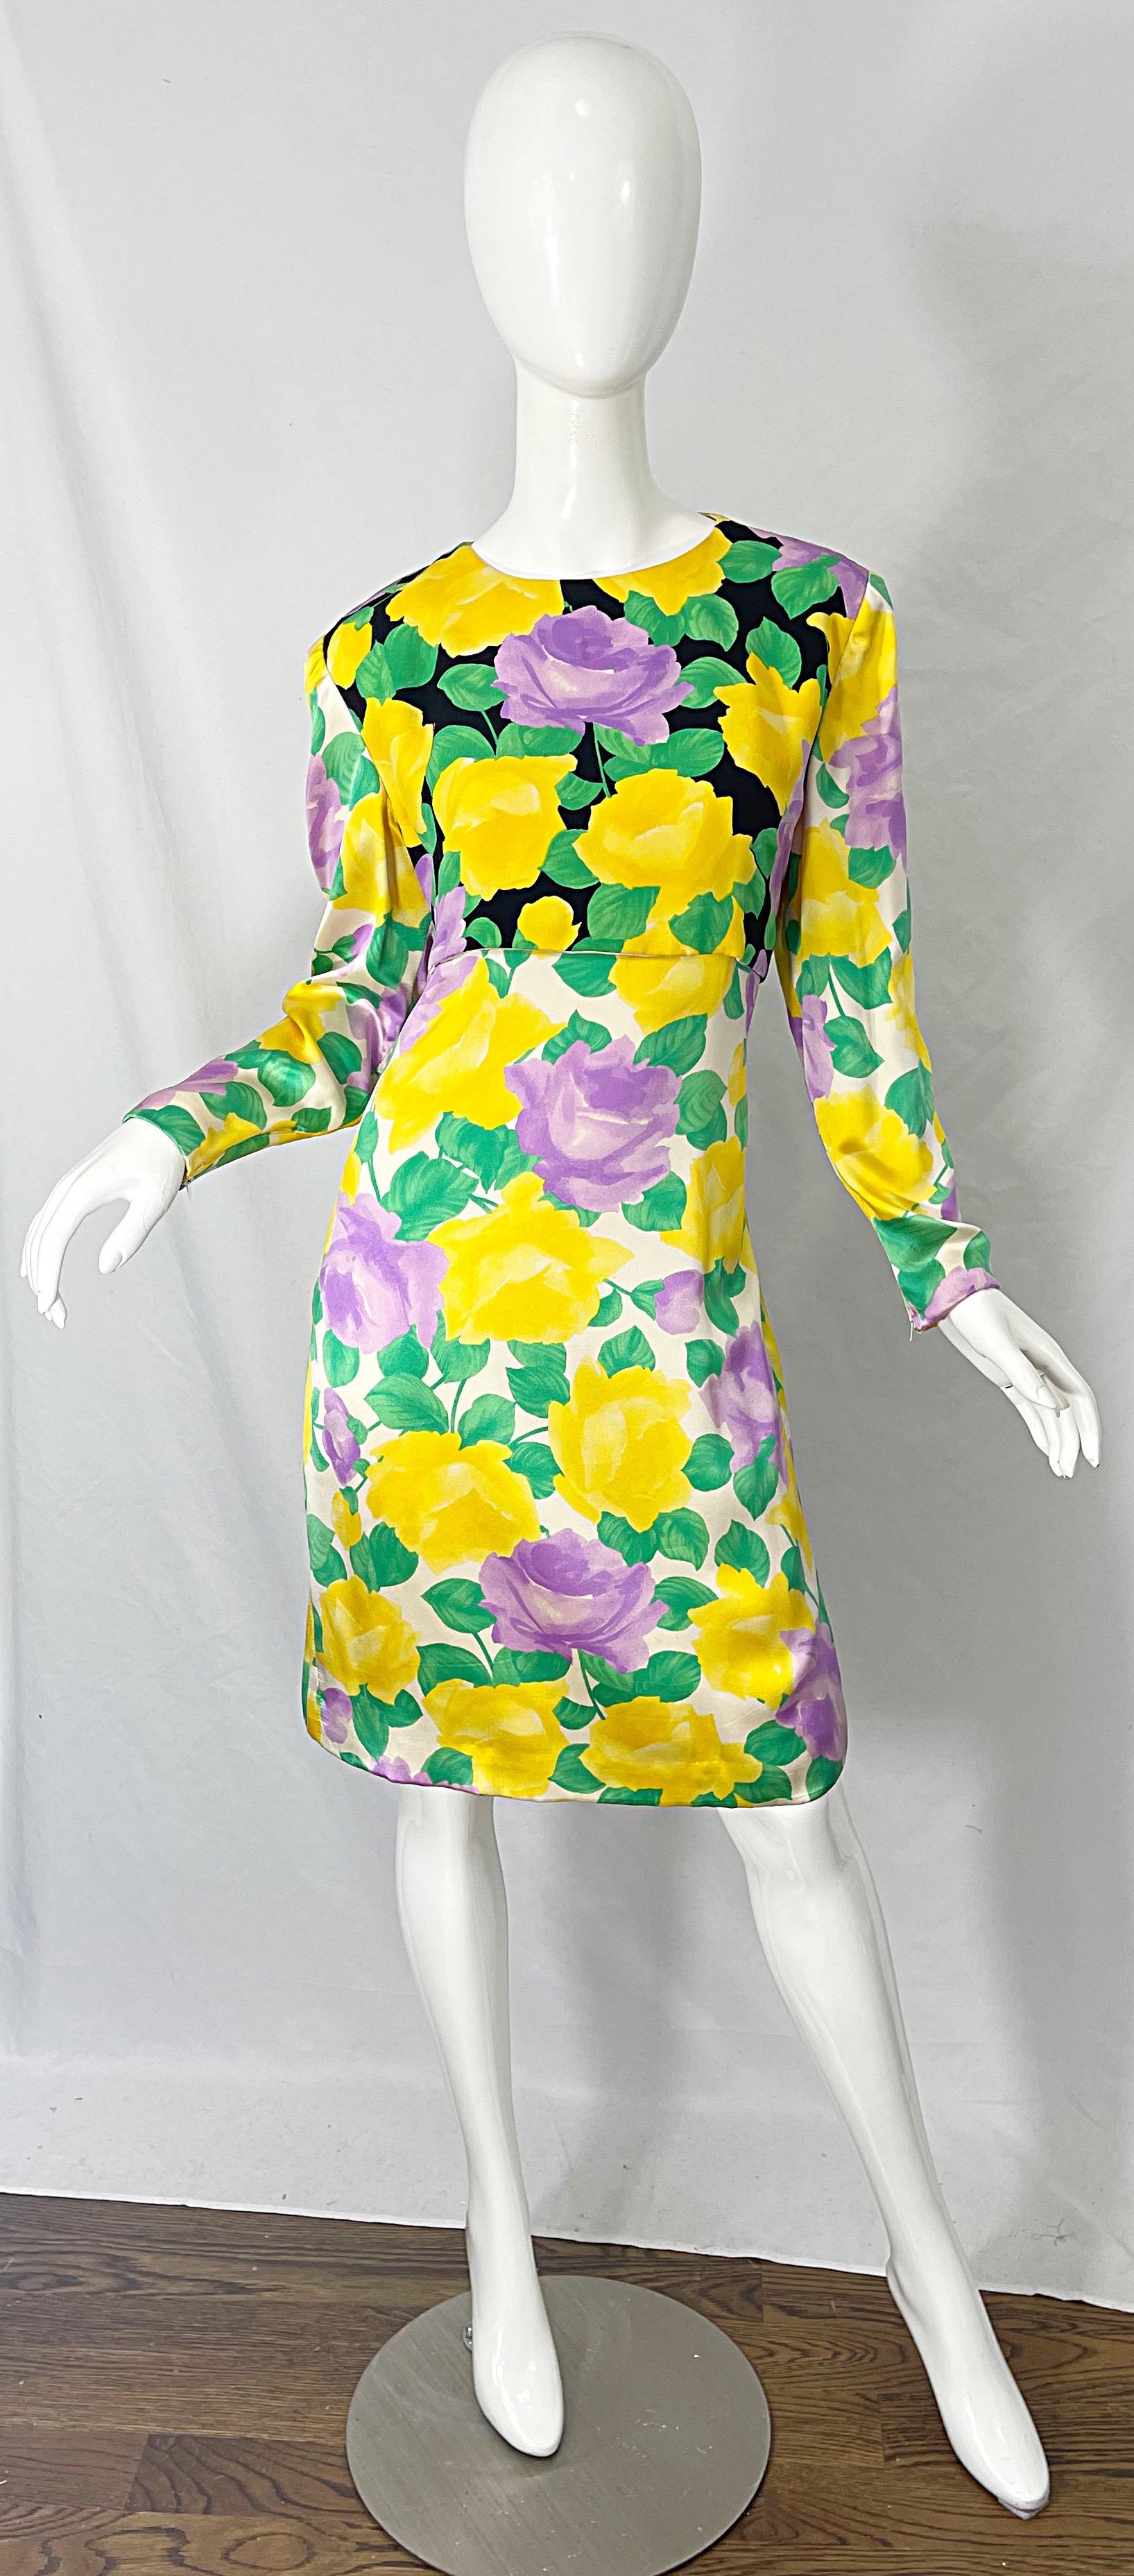 Beautiful vintage 80s GALANOS silk dress! Features roses / flowers in vibrant colors of yellow, purple, green, black and white. Hidden zipper up the back with hook-and-eye closure. Tailored bodice with hidden zippers at each sleeve cuff. Very well